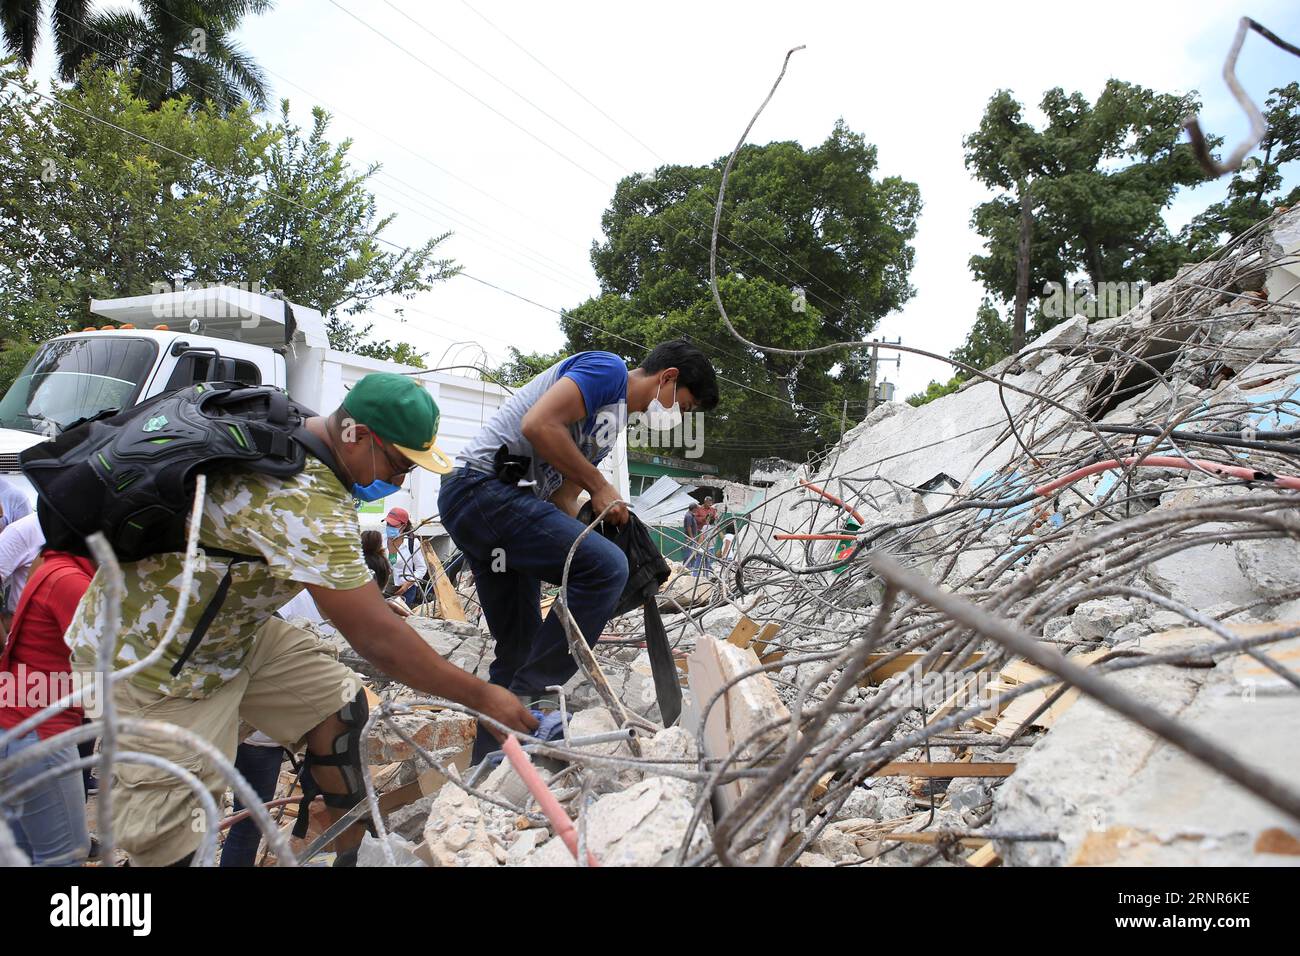 (170920) -- MORELOS (MEXICO), Sept. 20, 2017 -- Volunteers remove debris of a collapsed building in Jojutla, state of Morelos, Mexico, on Sept. 20, 2017. Mexico s President Enrique Pena Nieto decreed three days of national mourning on Wednesday for the victims of the powerful quake that killed over 200 people and toppled buildings in central Mexico on Tuesday. Armando Solis) (ma) (vf) MEXICO-MORELOS-EARTHQUAKE MarioxDiaz PUBLICATIONxNOTxINxCHN Stock Photo